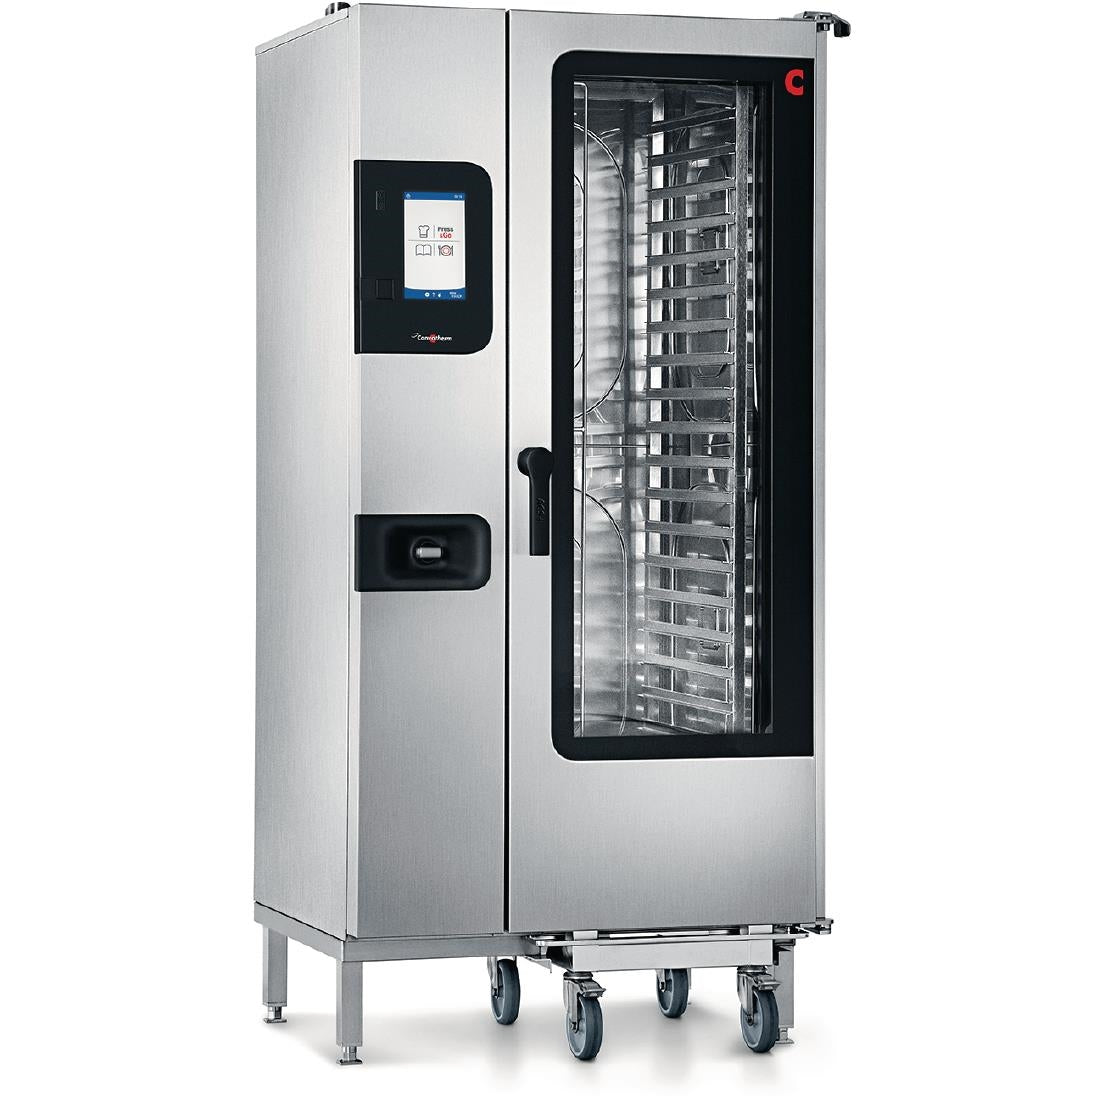 DR436-MO Convotherm 4 easyTouch Combi Oven 20 x 1 x1 GN Grid JD Catering Equipment Solutions Ltd